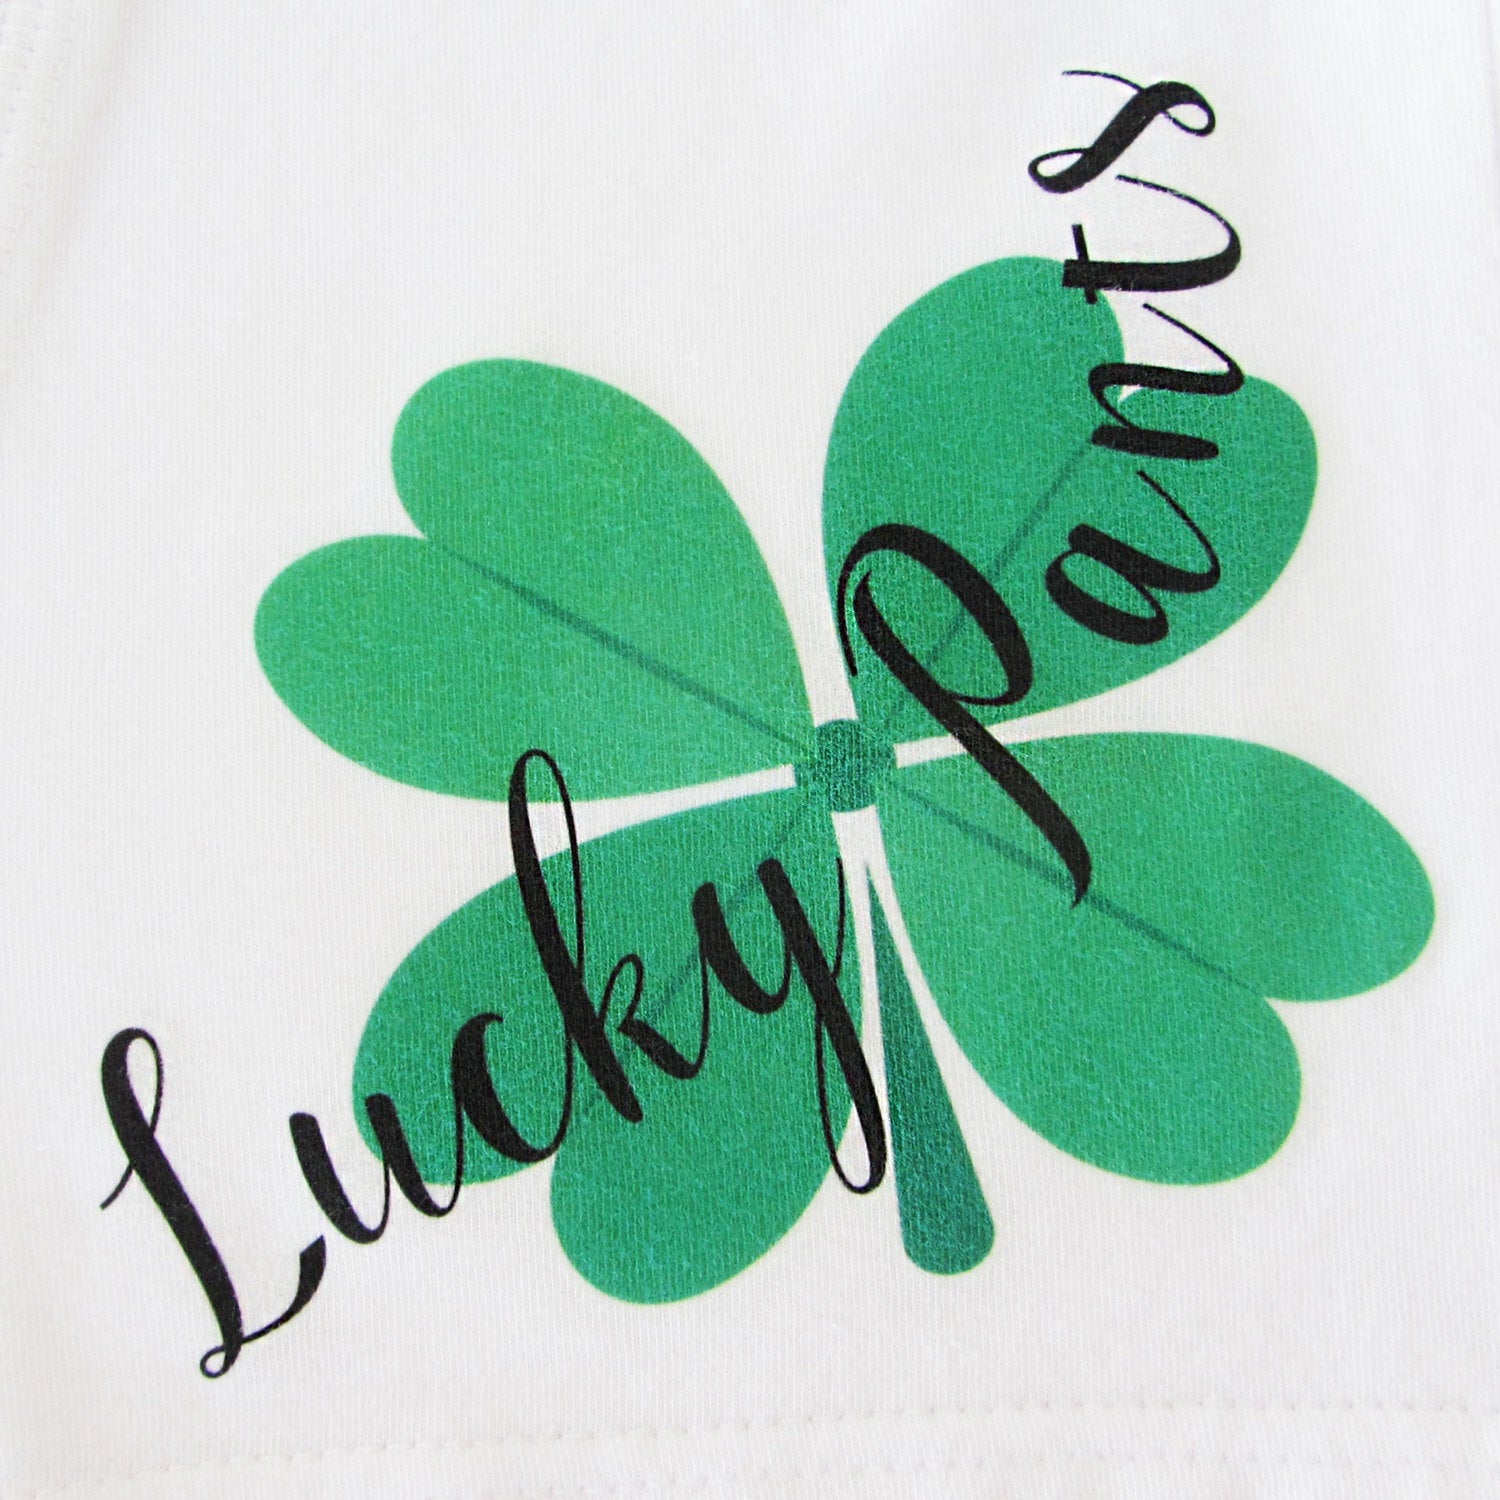 Lucky Pants, Personalised Men's Boxer Briefs